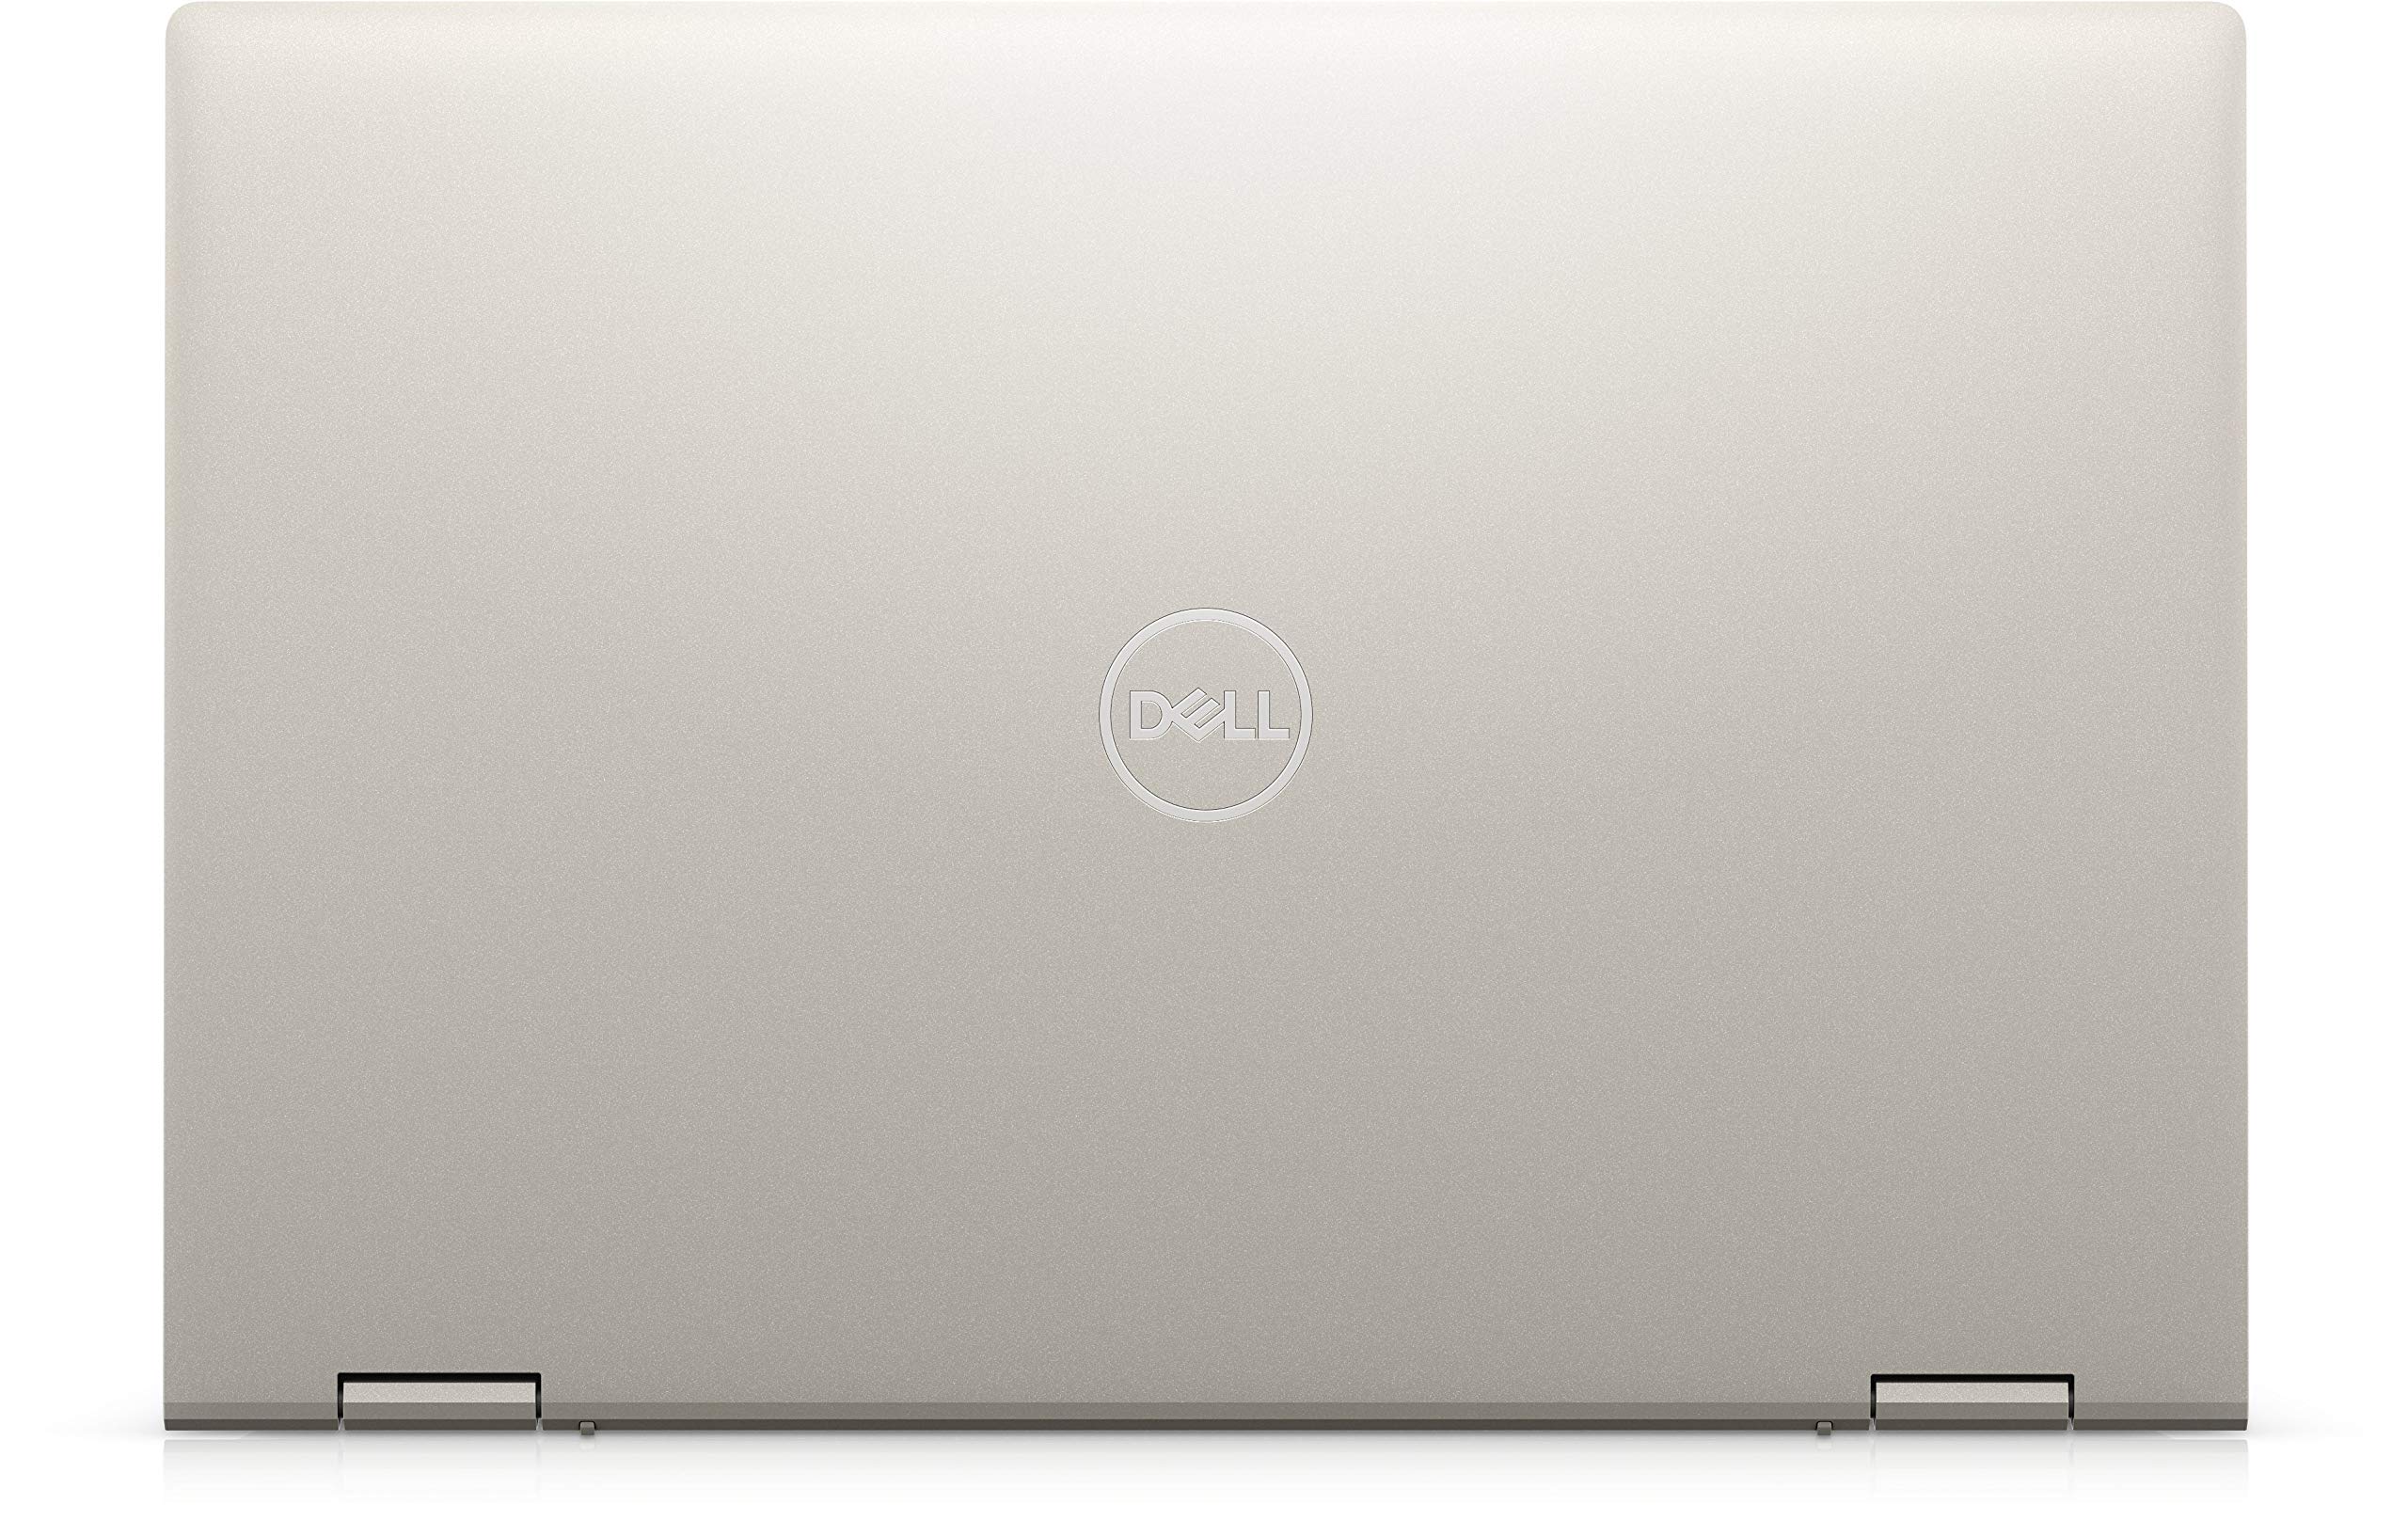 Dell 2021 Newest Inspiron 14